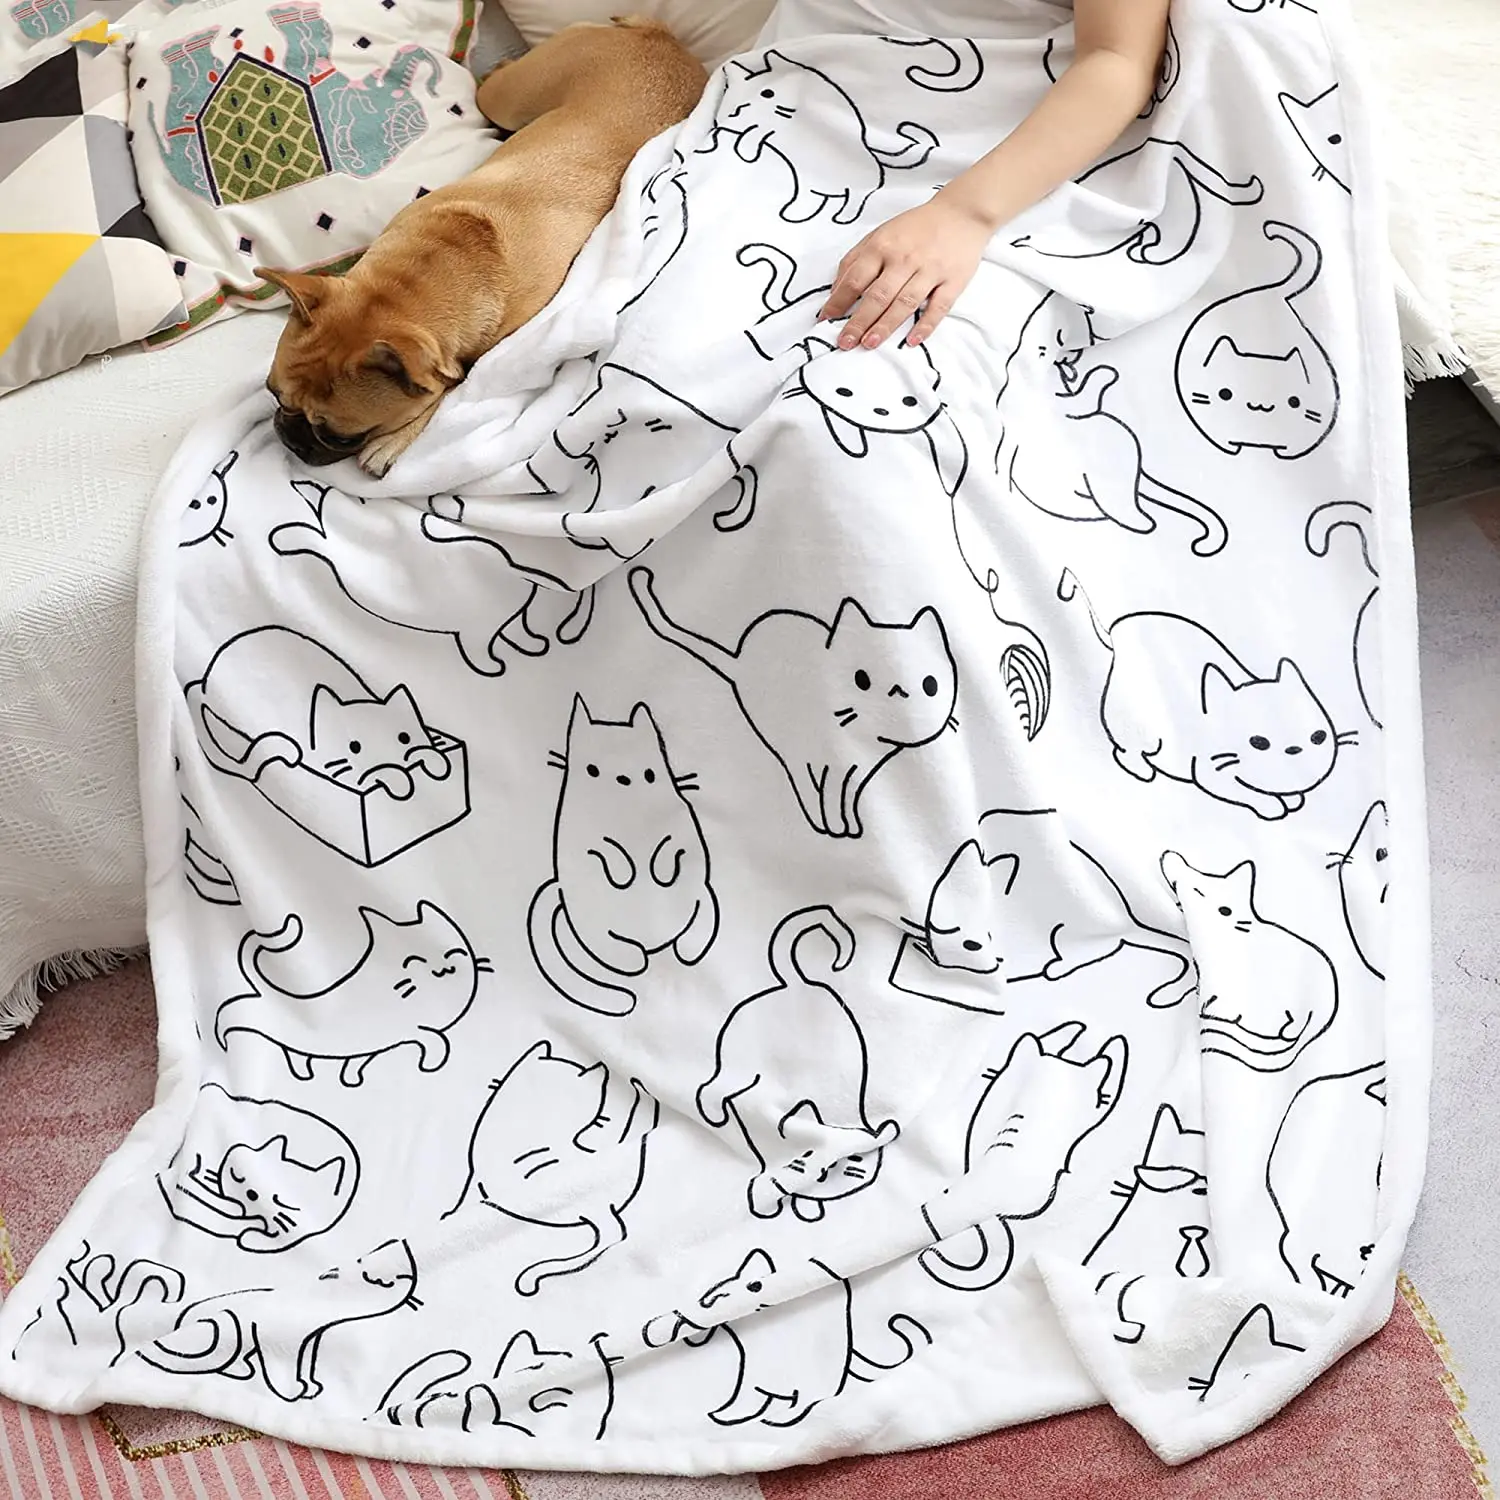 Cat Throw Blanket Cute Animals Pet Pattern Sherpa Blanket for Bed Couch Chair Kawaii Cat Lover Gifts Soft Warm Cozy Fuzzy Throw